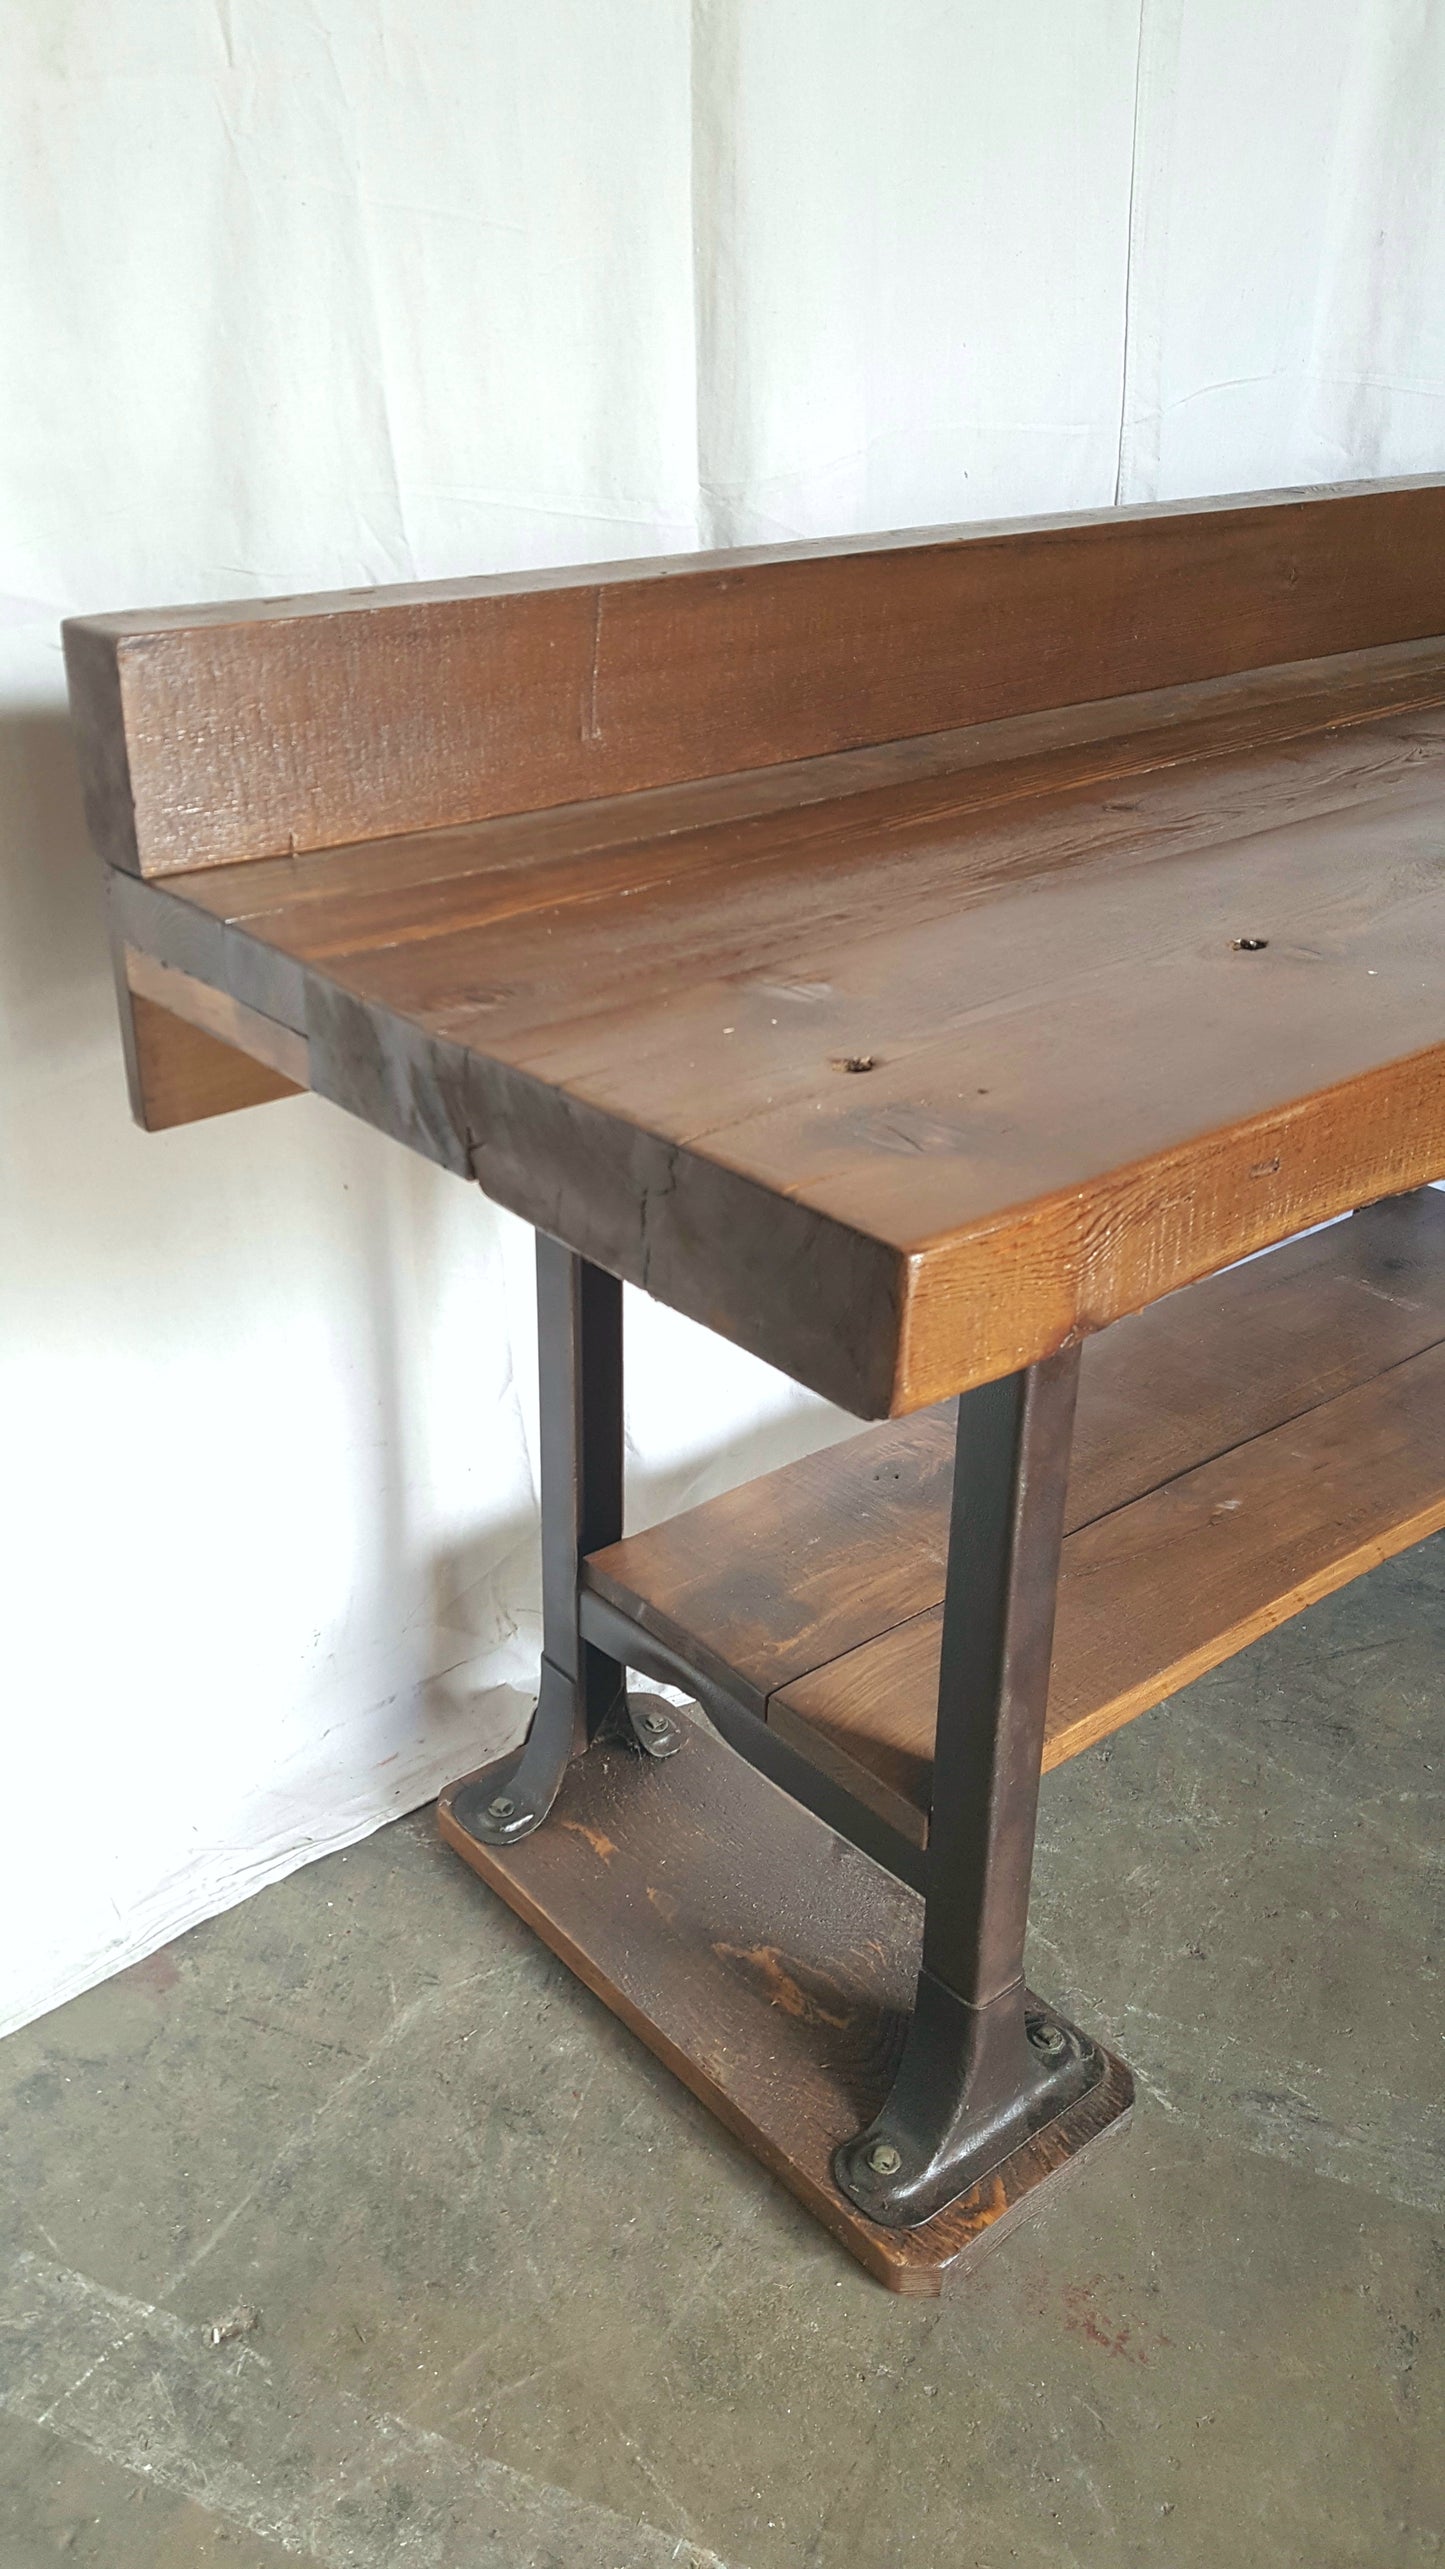 Work Table with Removable Back Piece